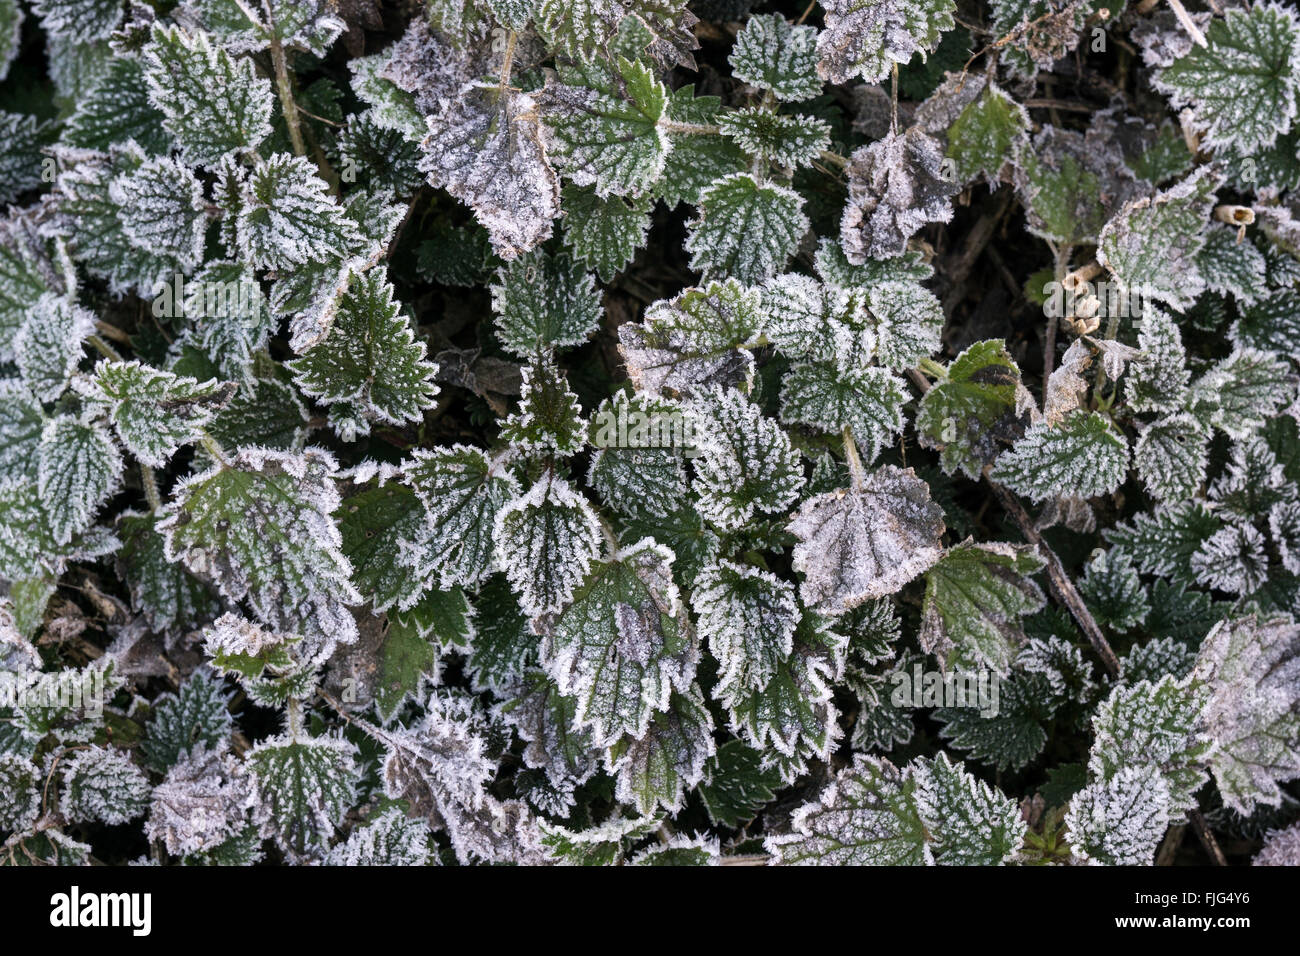 Groundcover, plants covered with hoarfrost, Baden-Württemberg, Germany Stock Photo